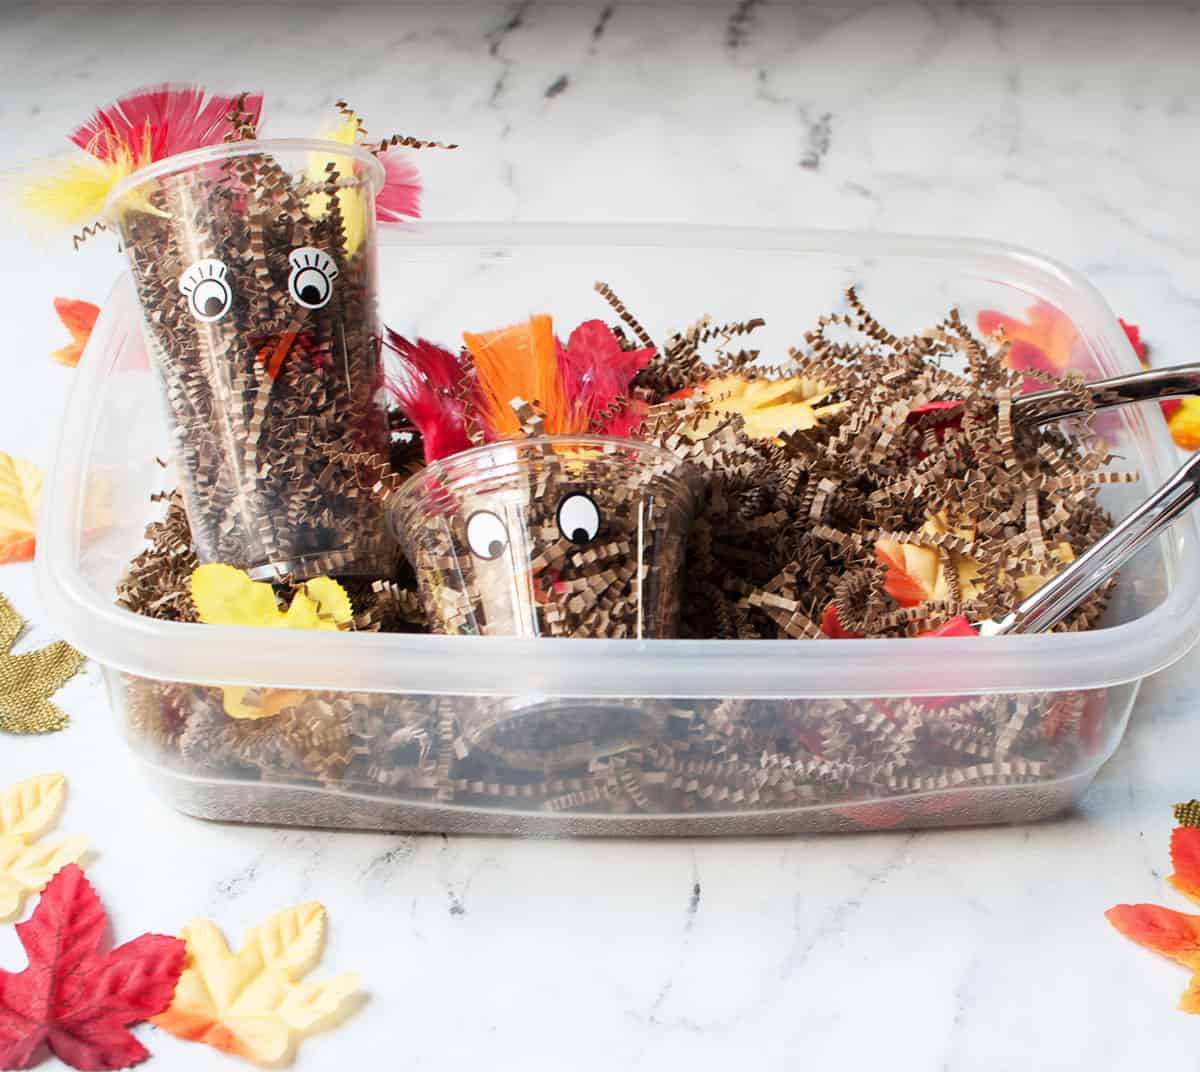 A turkey sensory bin made from plastic cups with turkey faces drawn on them and brown crinkle paper.